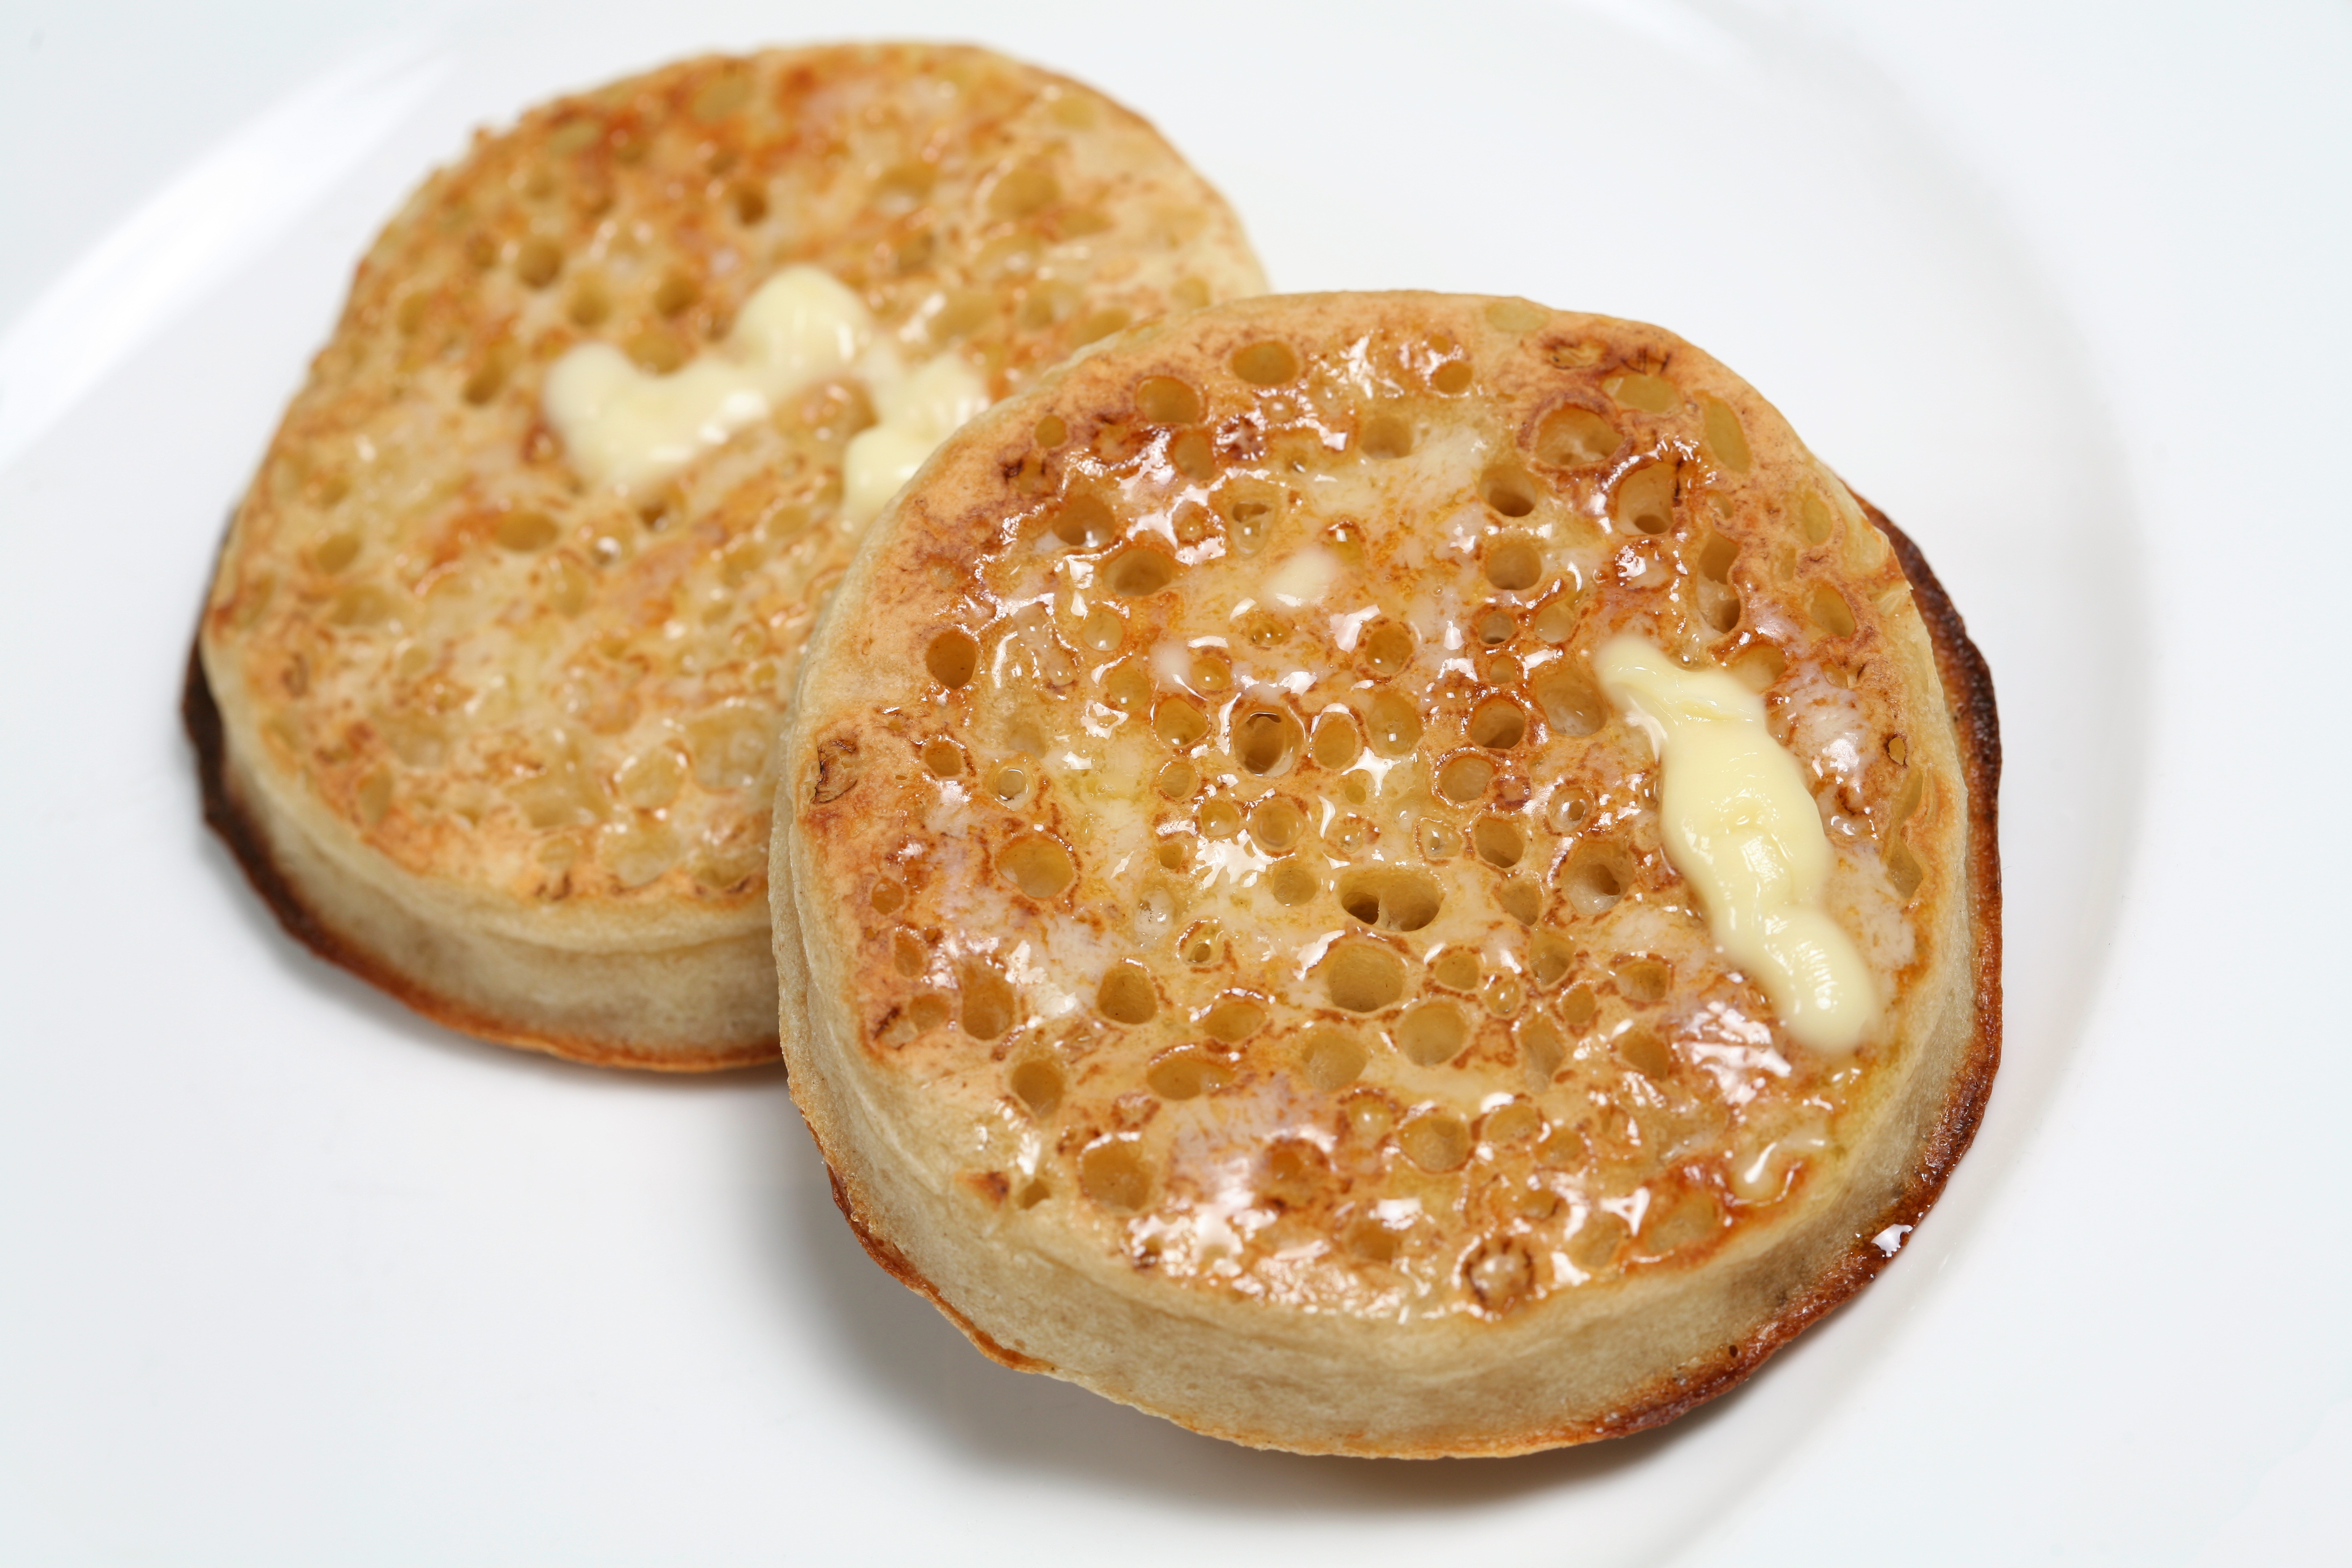 Buttered Crumpets